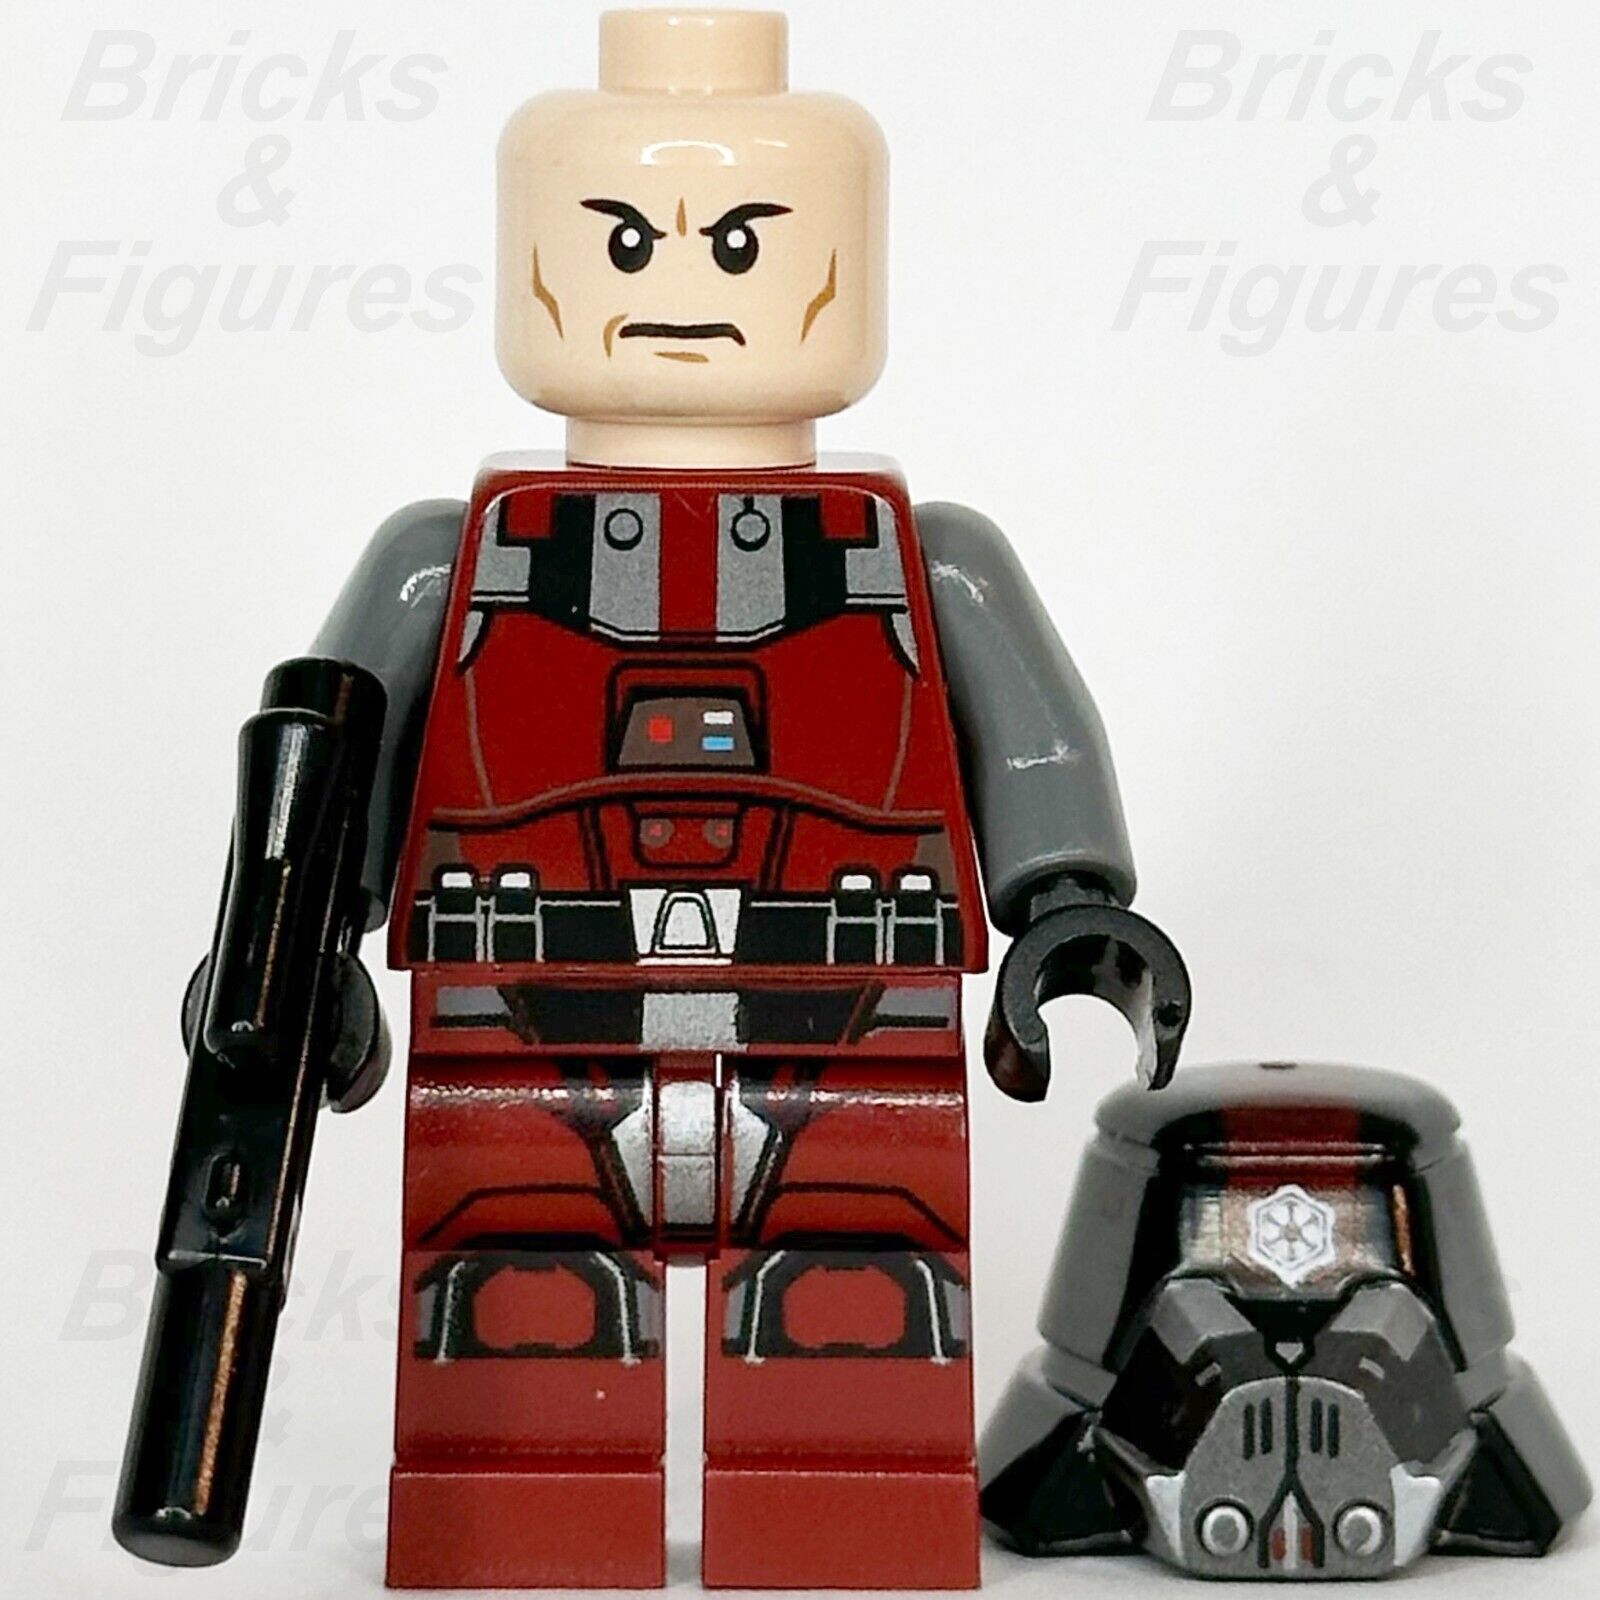 LEGO Star Wars Sith Trooper Minifigure The Old Republic Dark Red 75001 sw0436